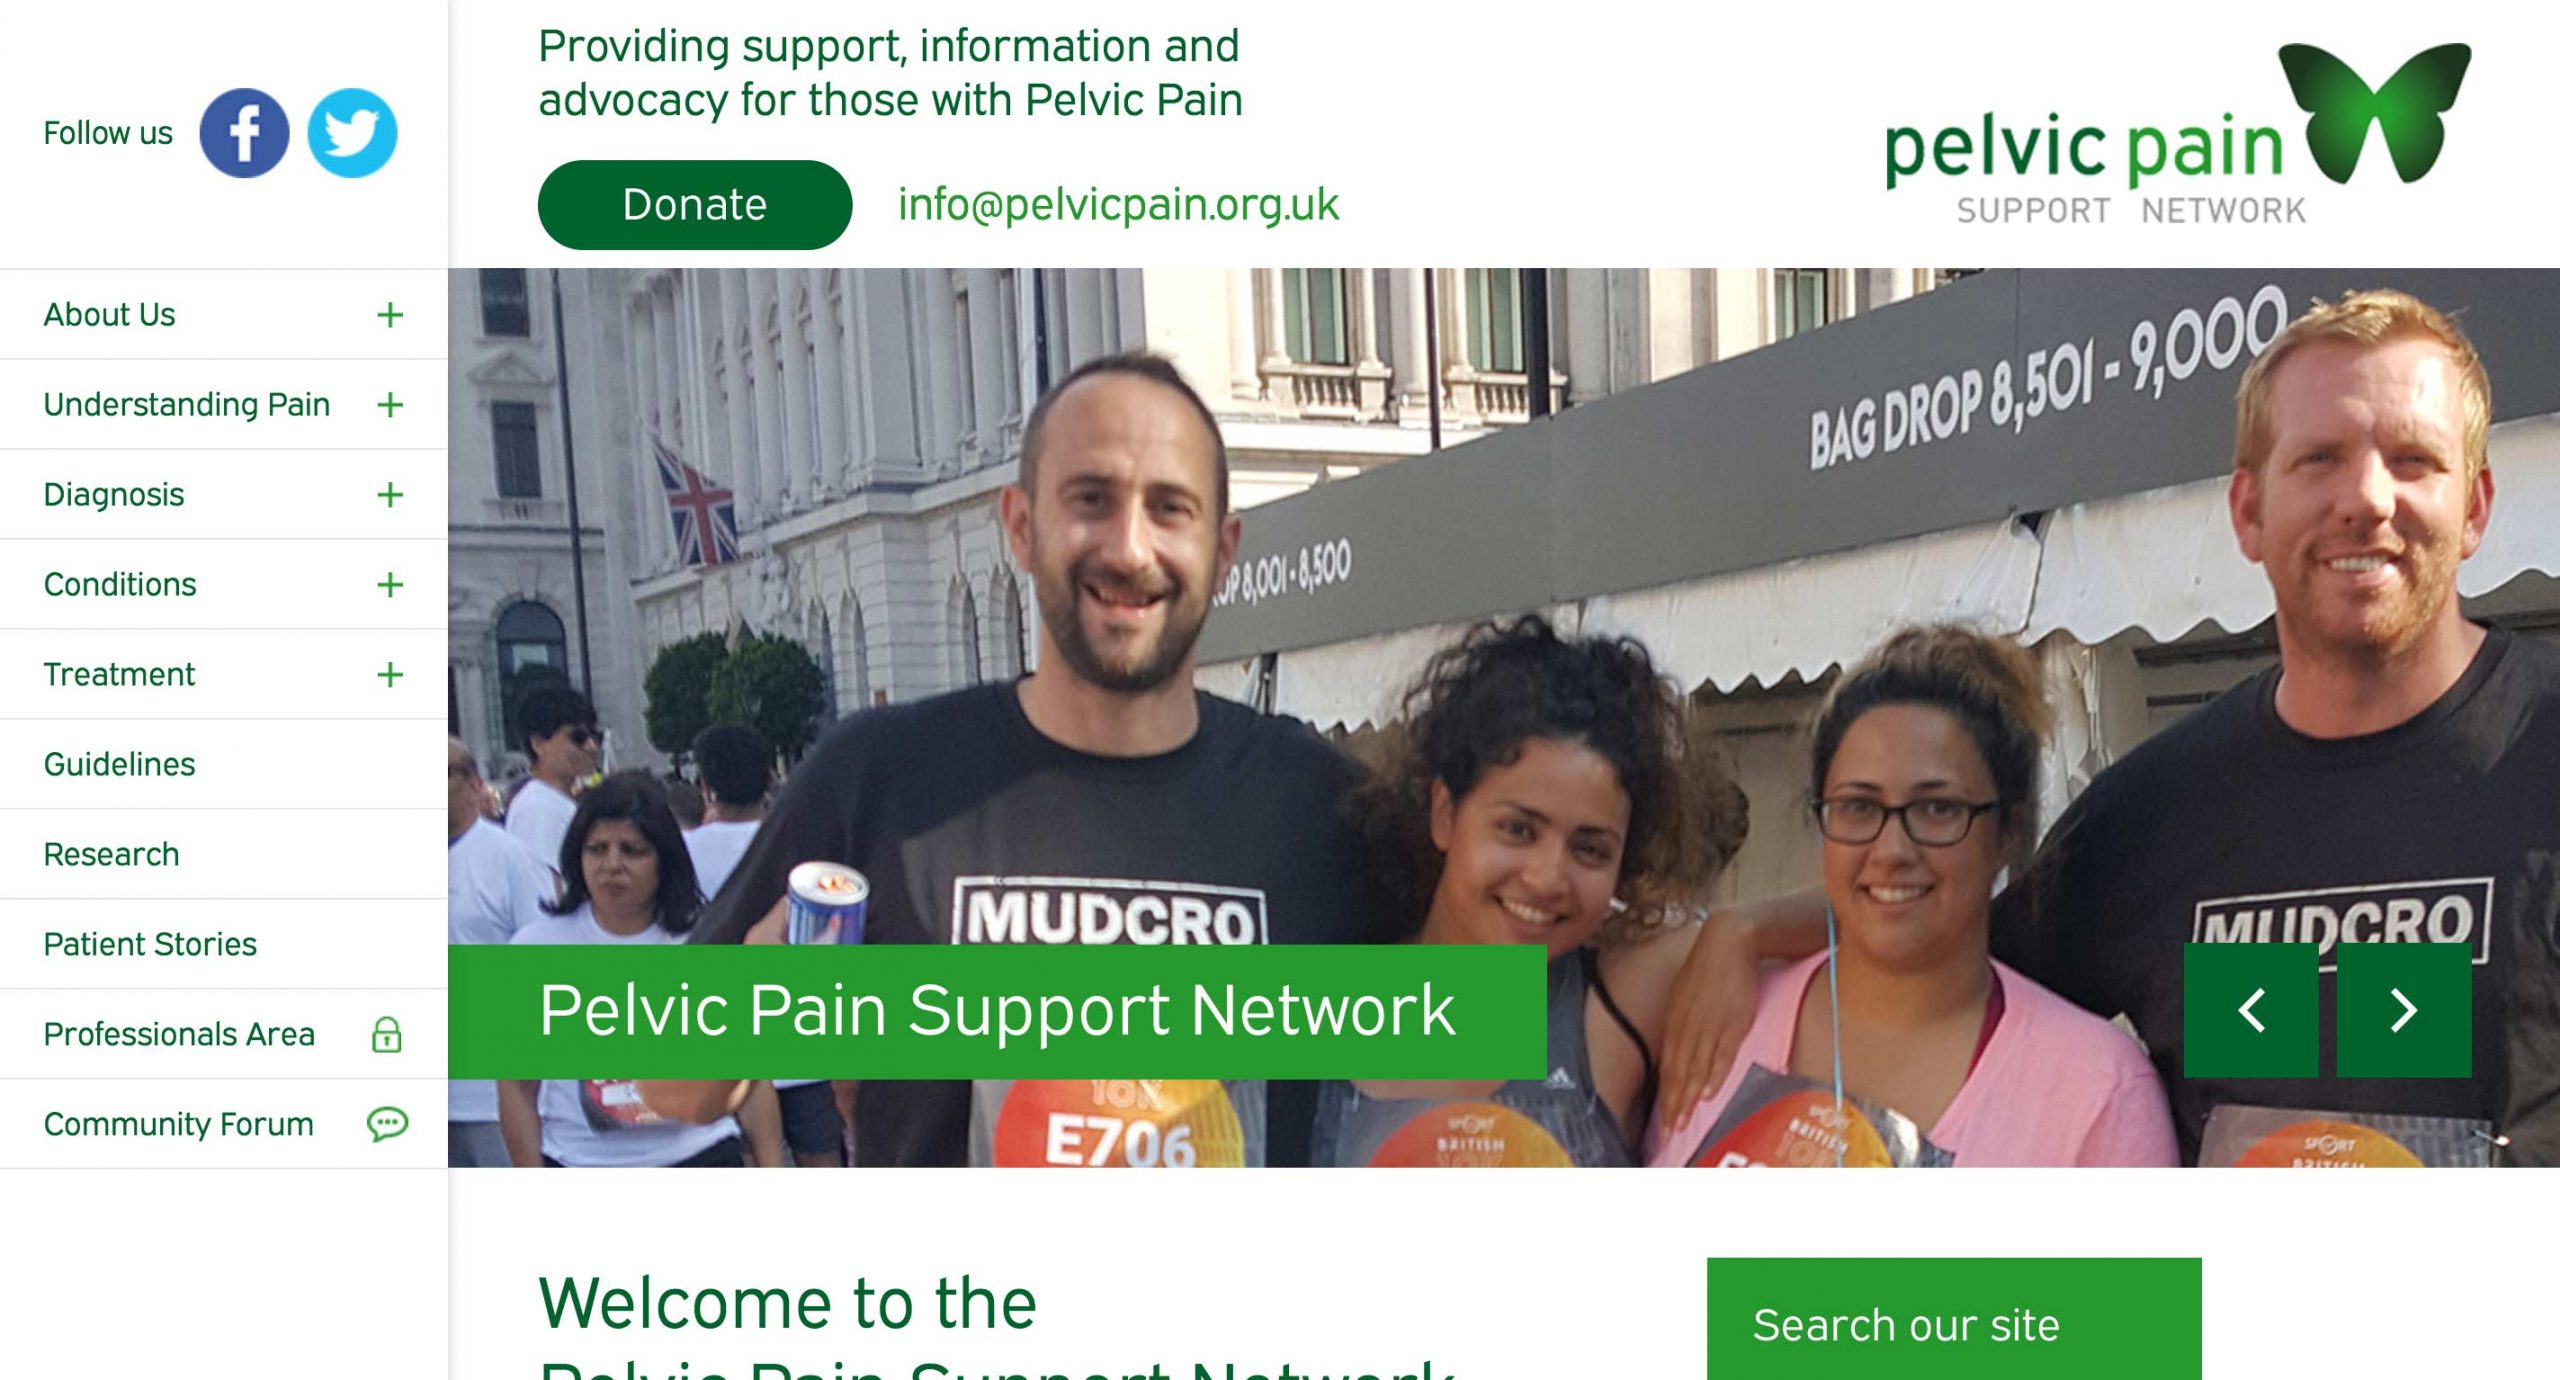 The Pelvic Pain Support Network